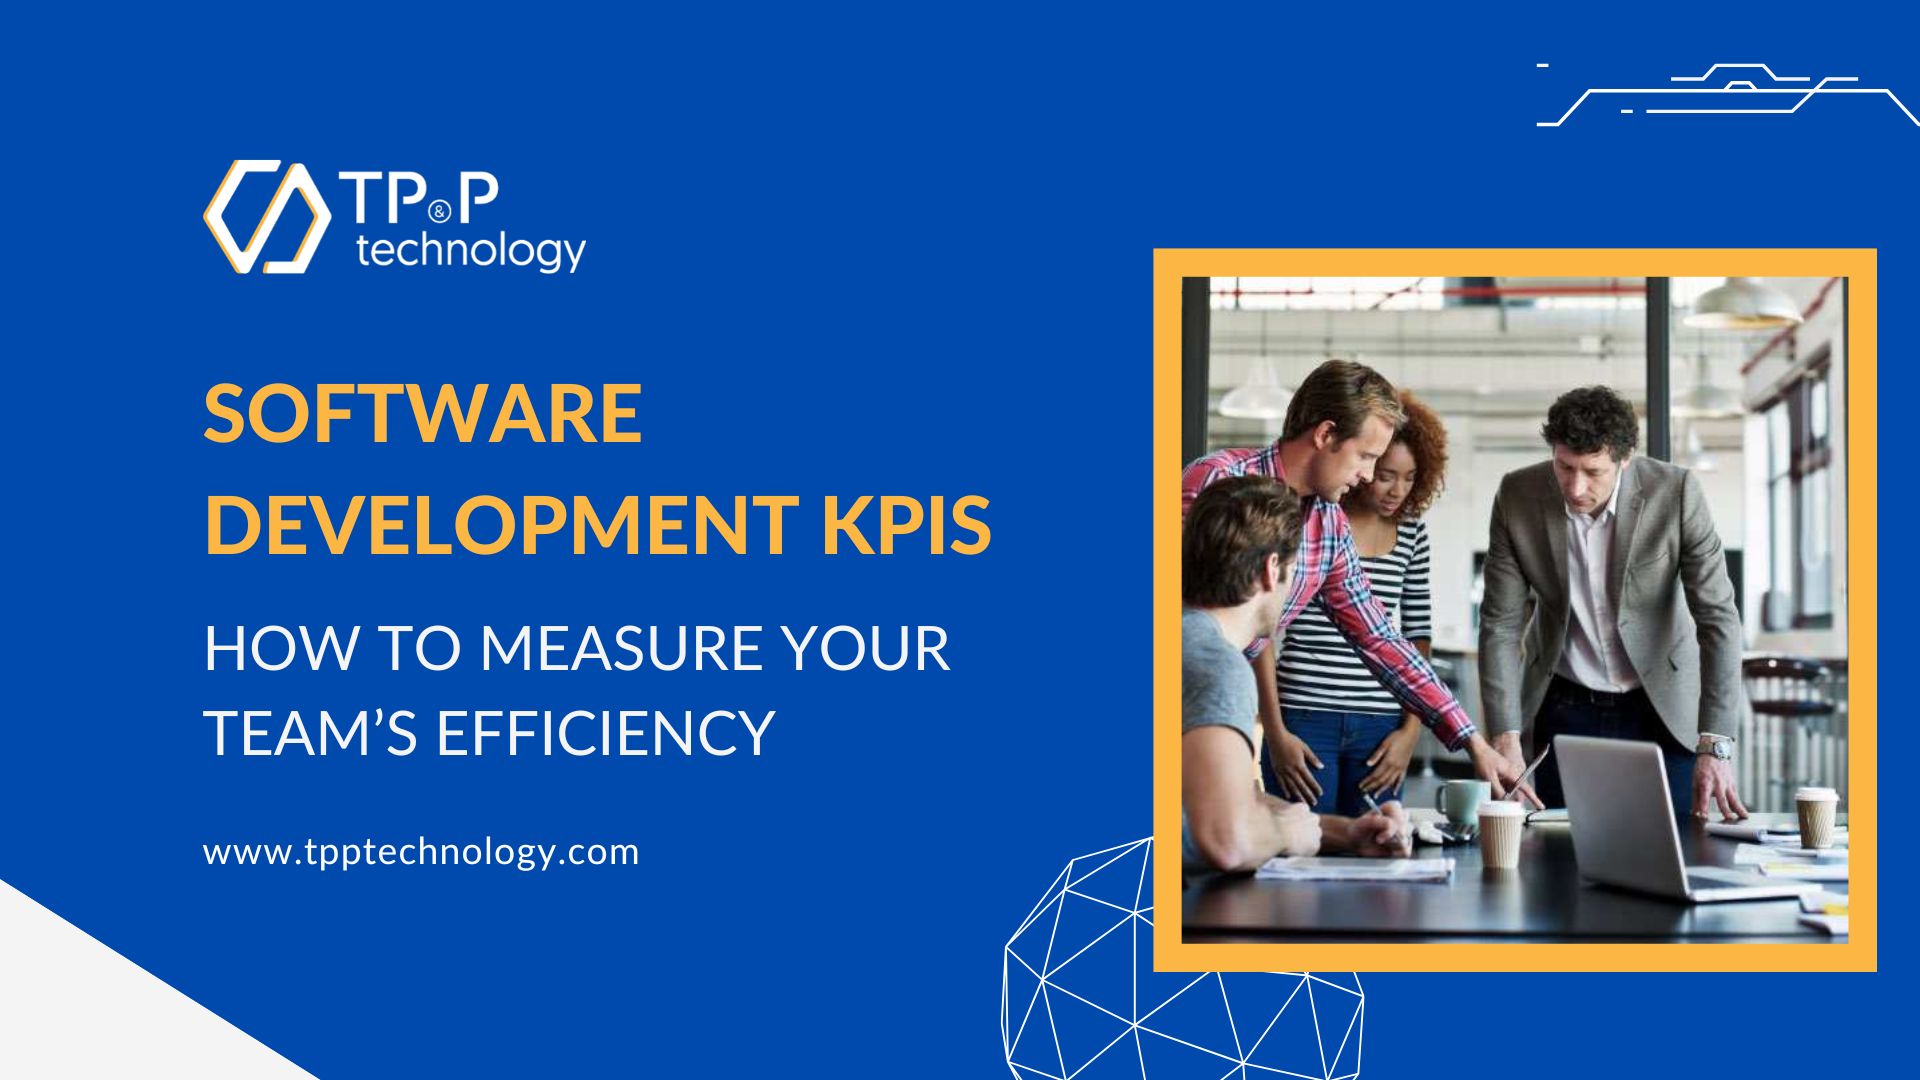 Software Development KPIs: How To Measure Your Team's Efficiency